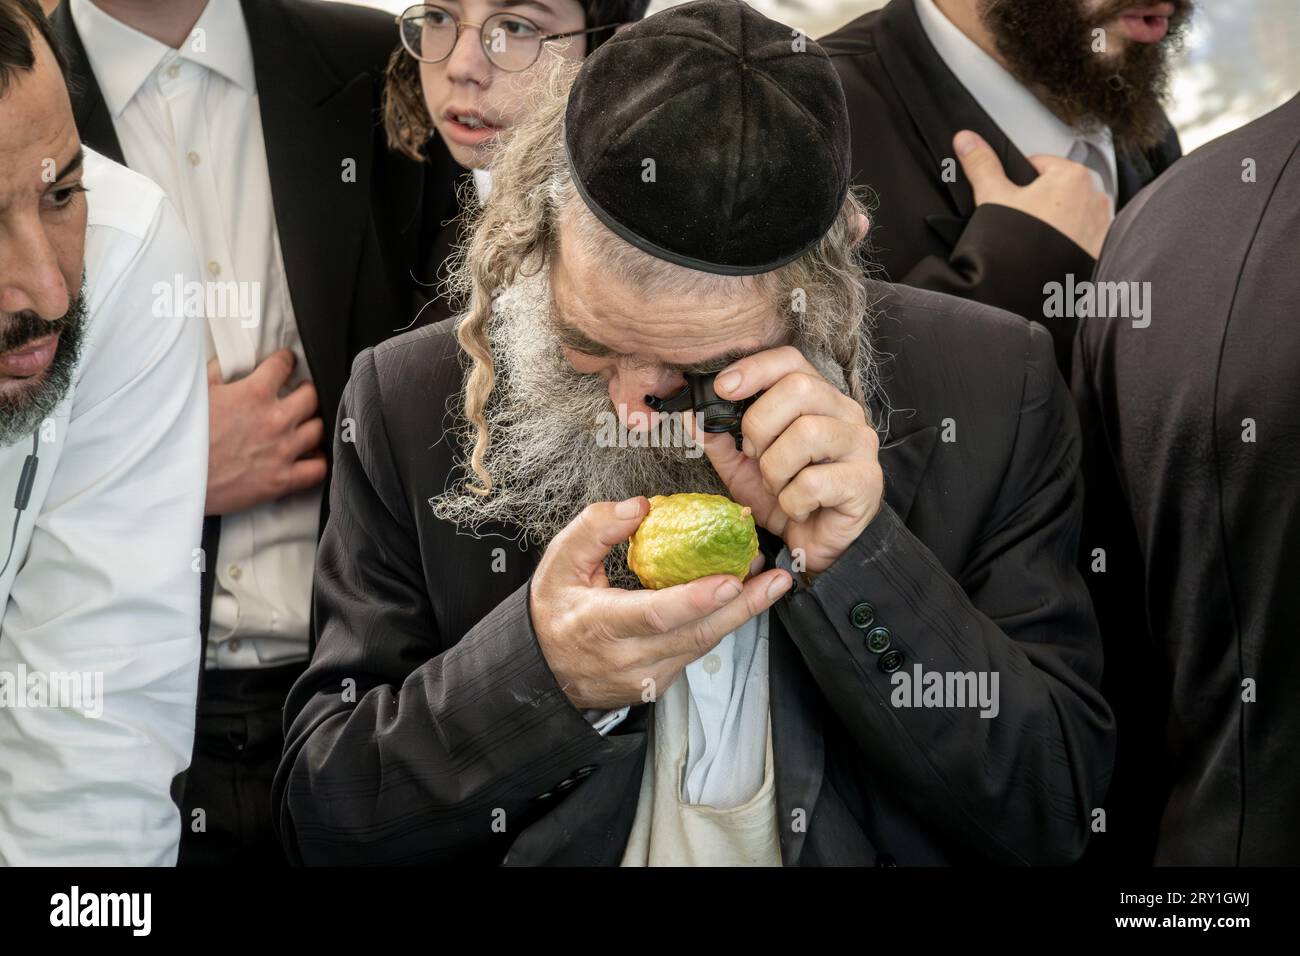 Jerusalem, Israel. 28th September, 2023. Jewish religious men meticulously inspect an etrog, the fruit of a citron tree and one of the 'Four Species' as ordered in Leviticus 23:40, near Shuk Mahane Yehuda Market. Any slight imperfection invalidates the fruit. Preparations are underway for Sukkot, the Jewish Feast of Tabernacles. Credit: Nir Alon/Alamy Live News. Stock Photo